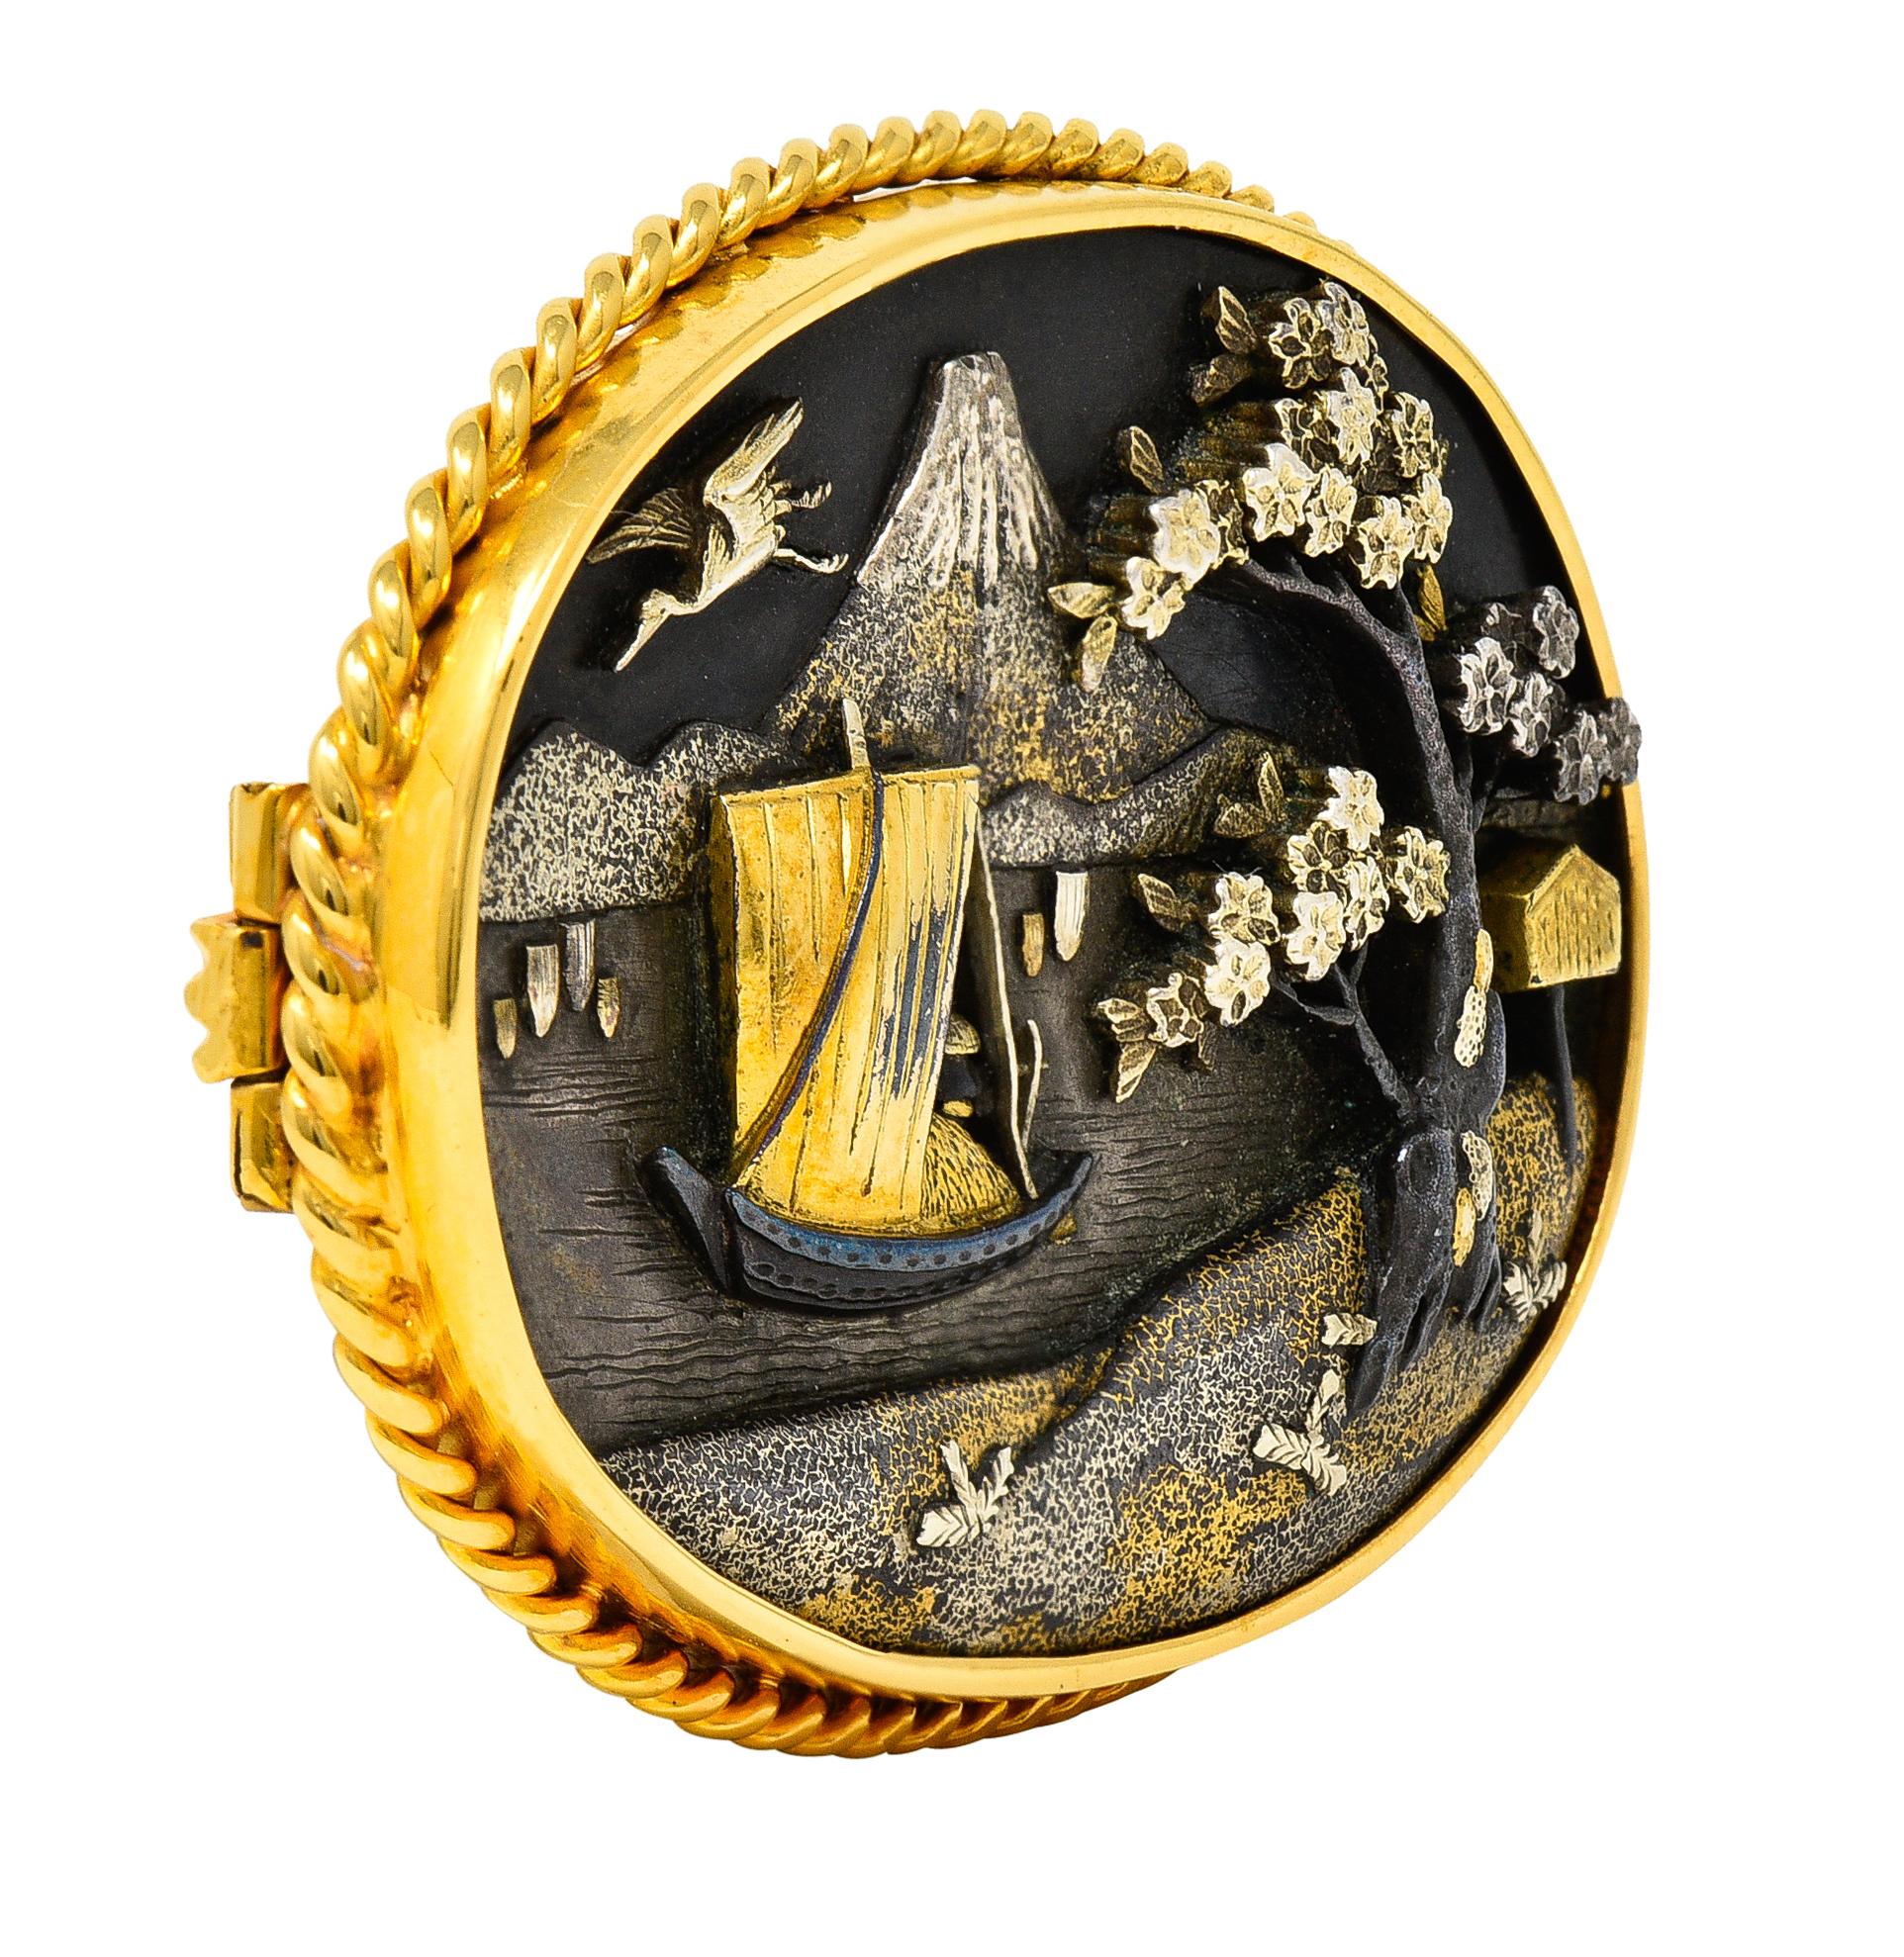 Designed as an oval shaped form decorated with a raised cameo of Japanese scenery
Depicting a cherry blossom tree, birdhouse, Mt.Fuji, sailboat, and soaring crane
Engraved and grooved with texture throughout - Shakudo style 
Comprised of oxidized